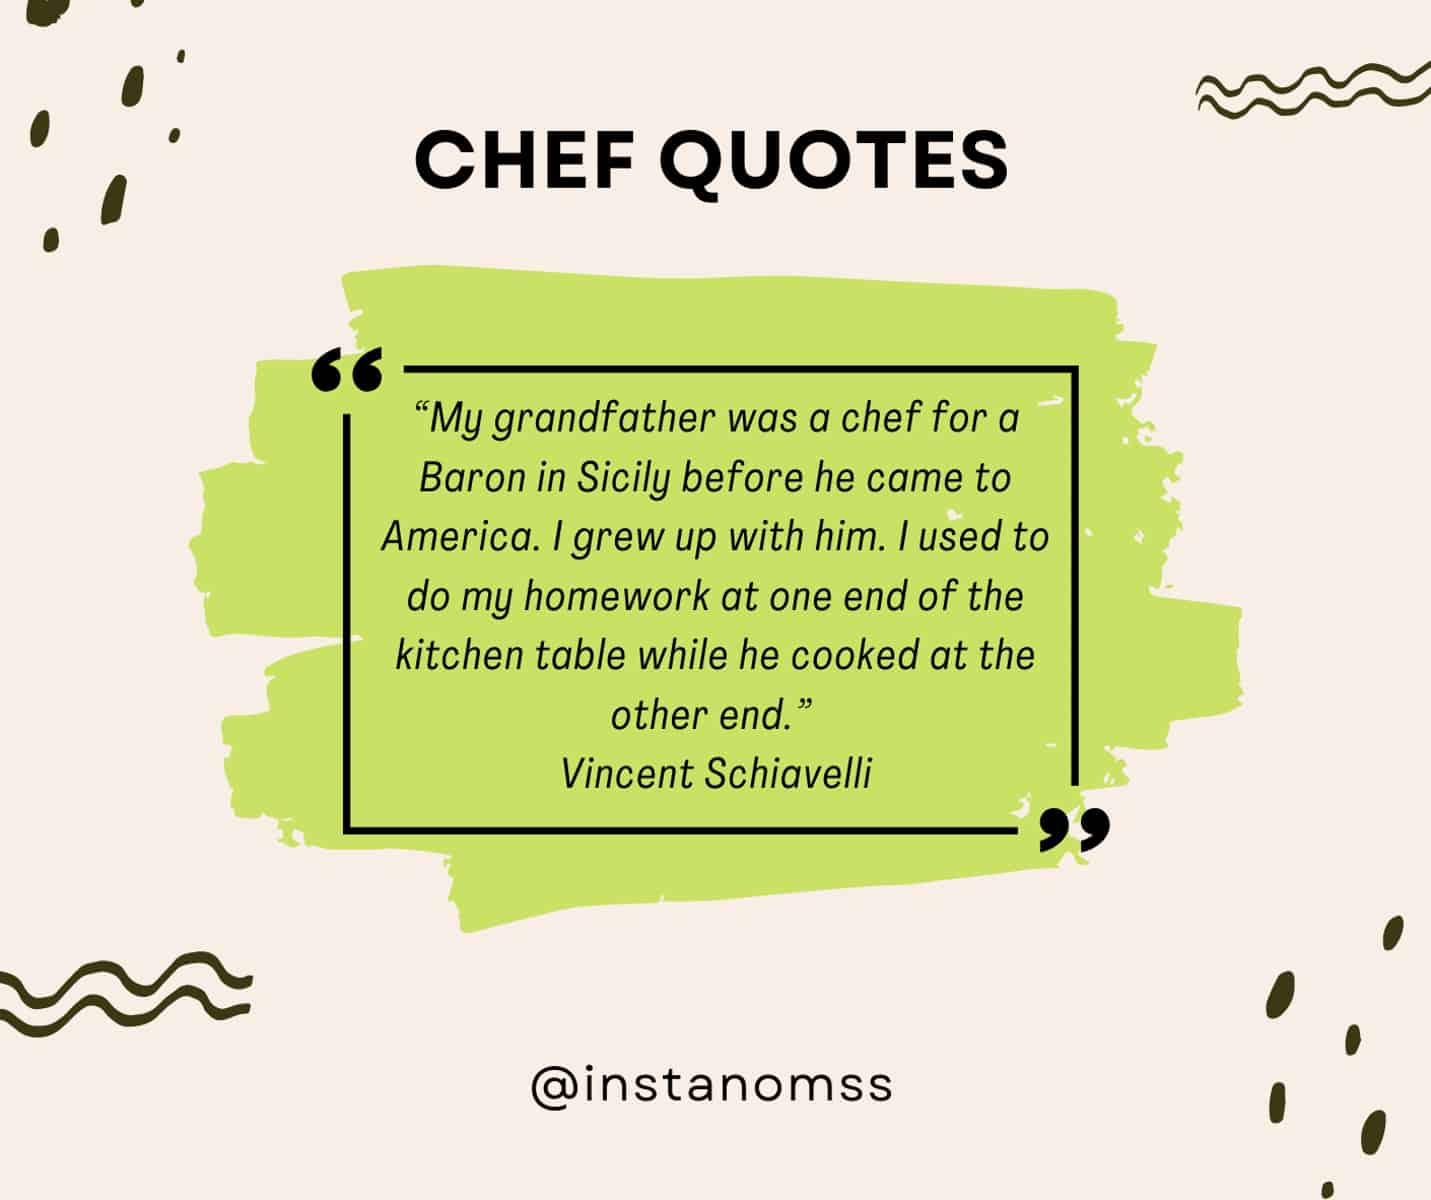 “My grandfather was a chef for a Baron in Sicily before he came to America. I grew up with him. I used to do my homework at one end of the kitchen table while he cooked at the other end.” Vincent Schiavelli